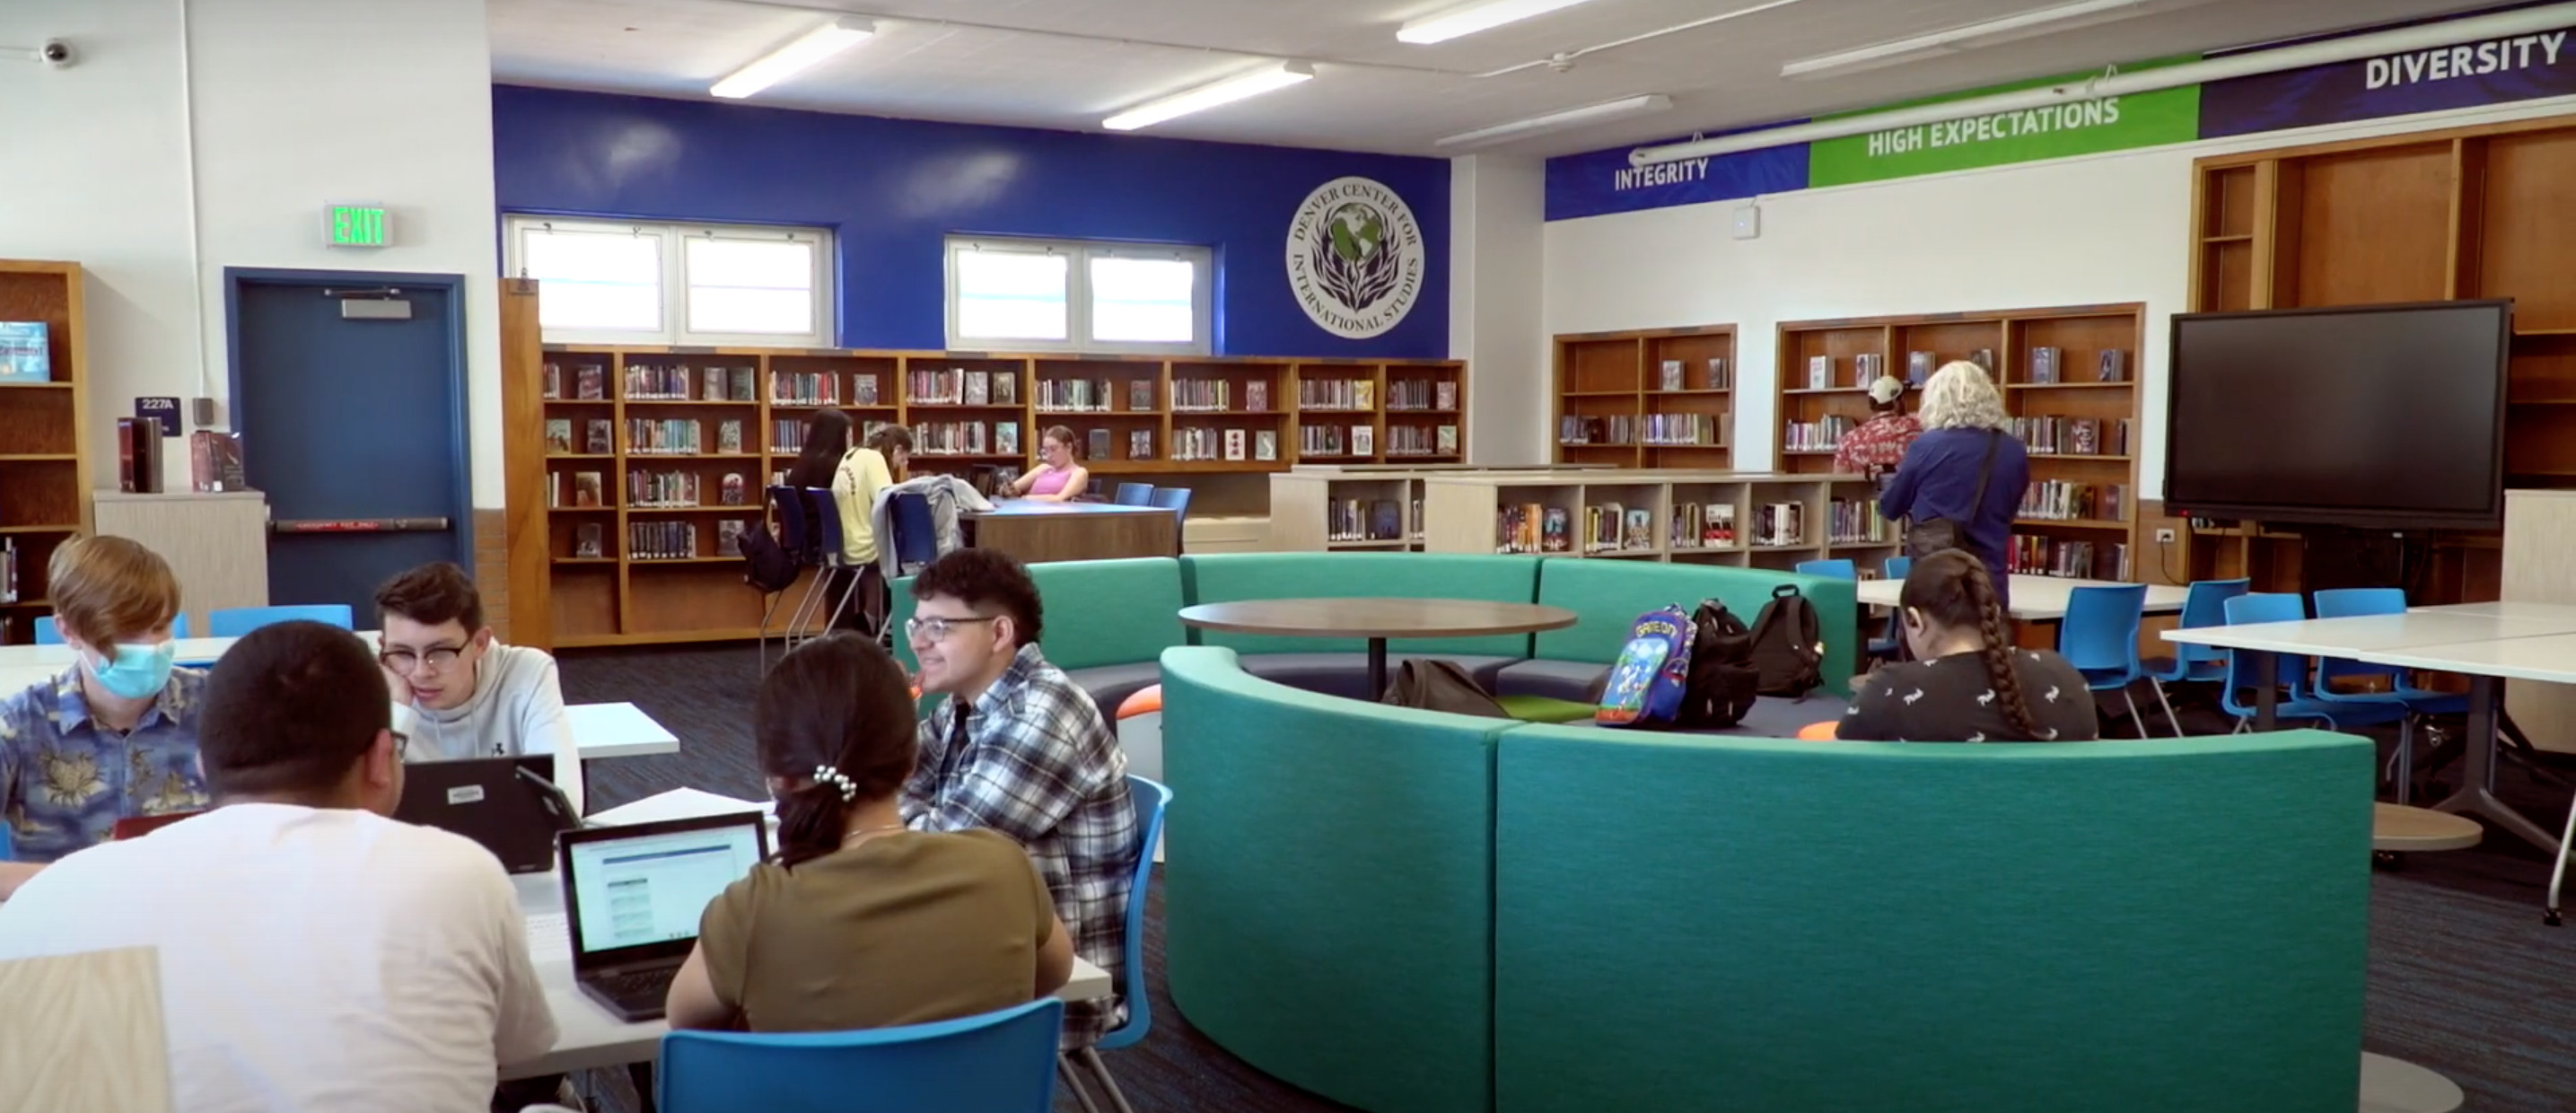 dcis library